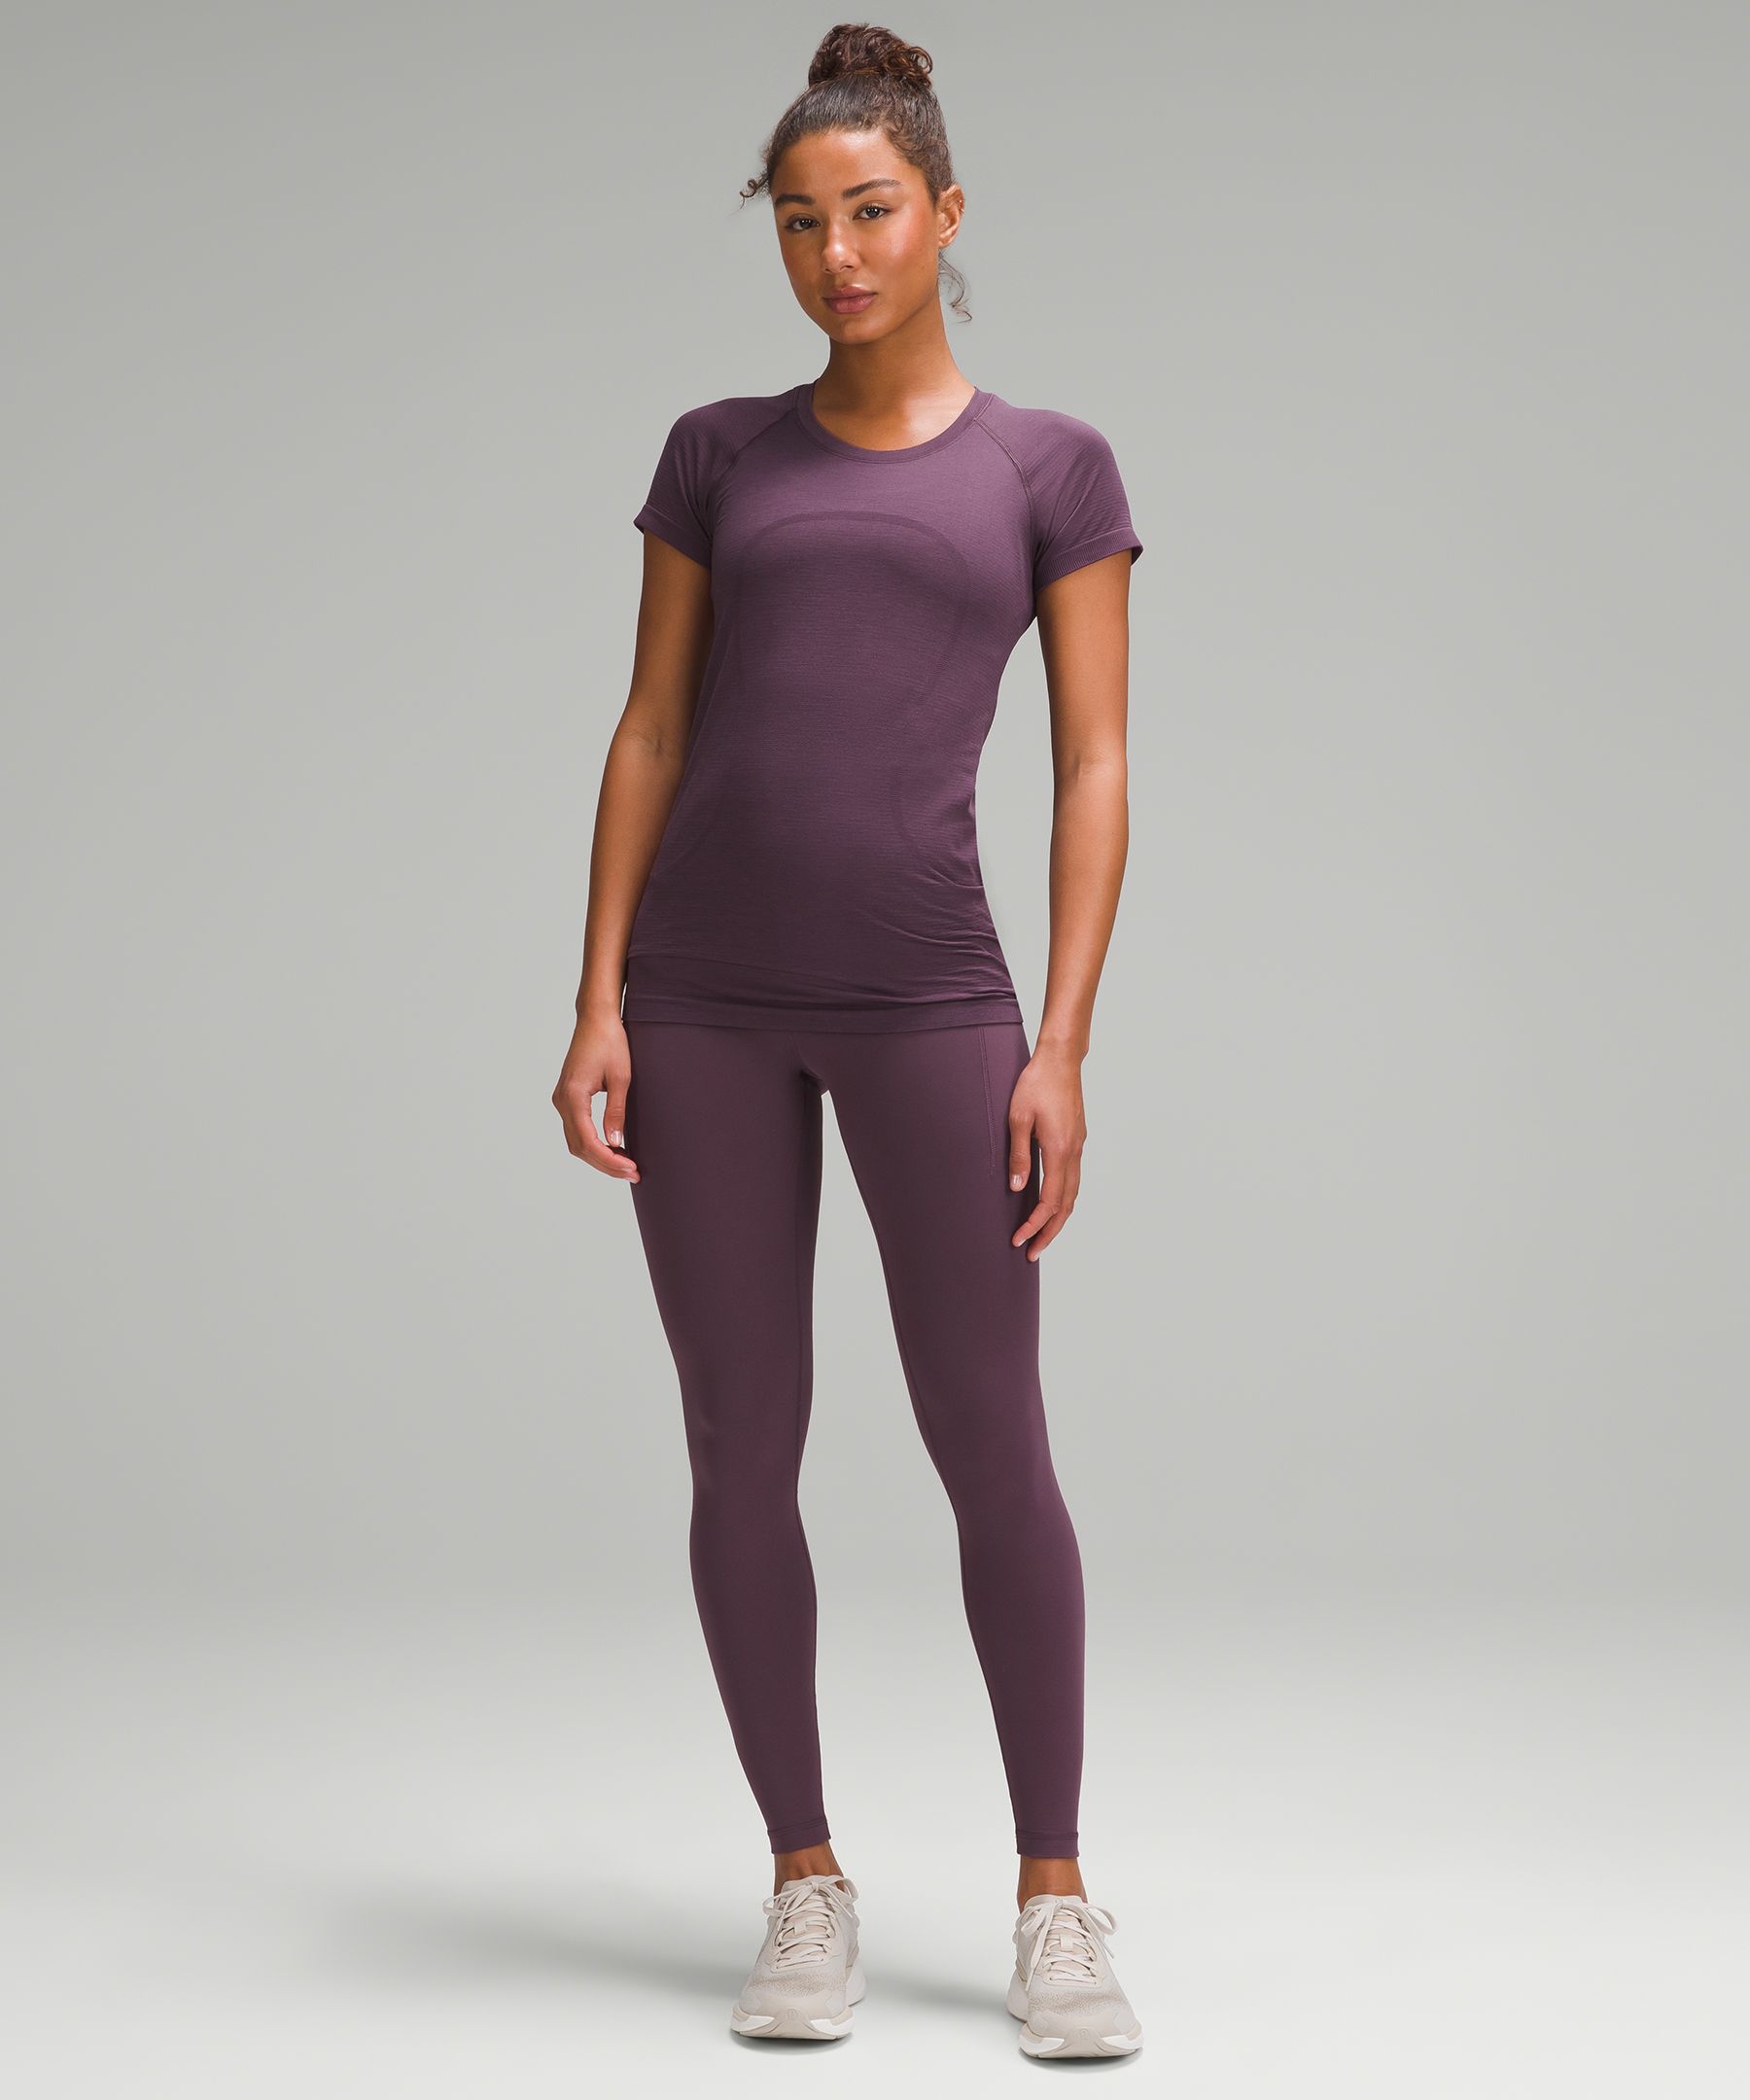 Fit session @lululemon 'must-haves' running edition Wearing: Speed